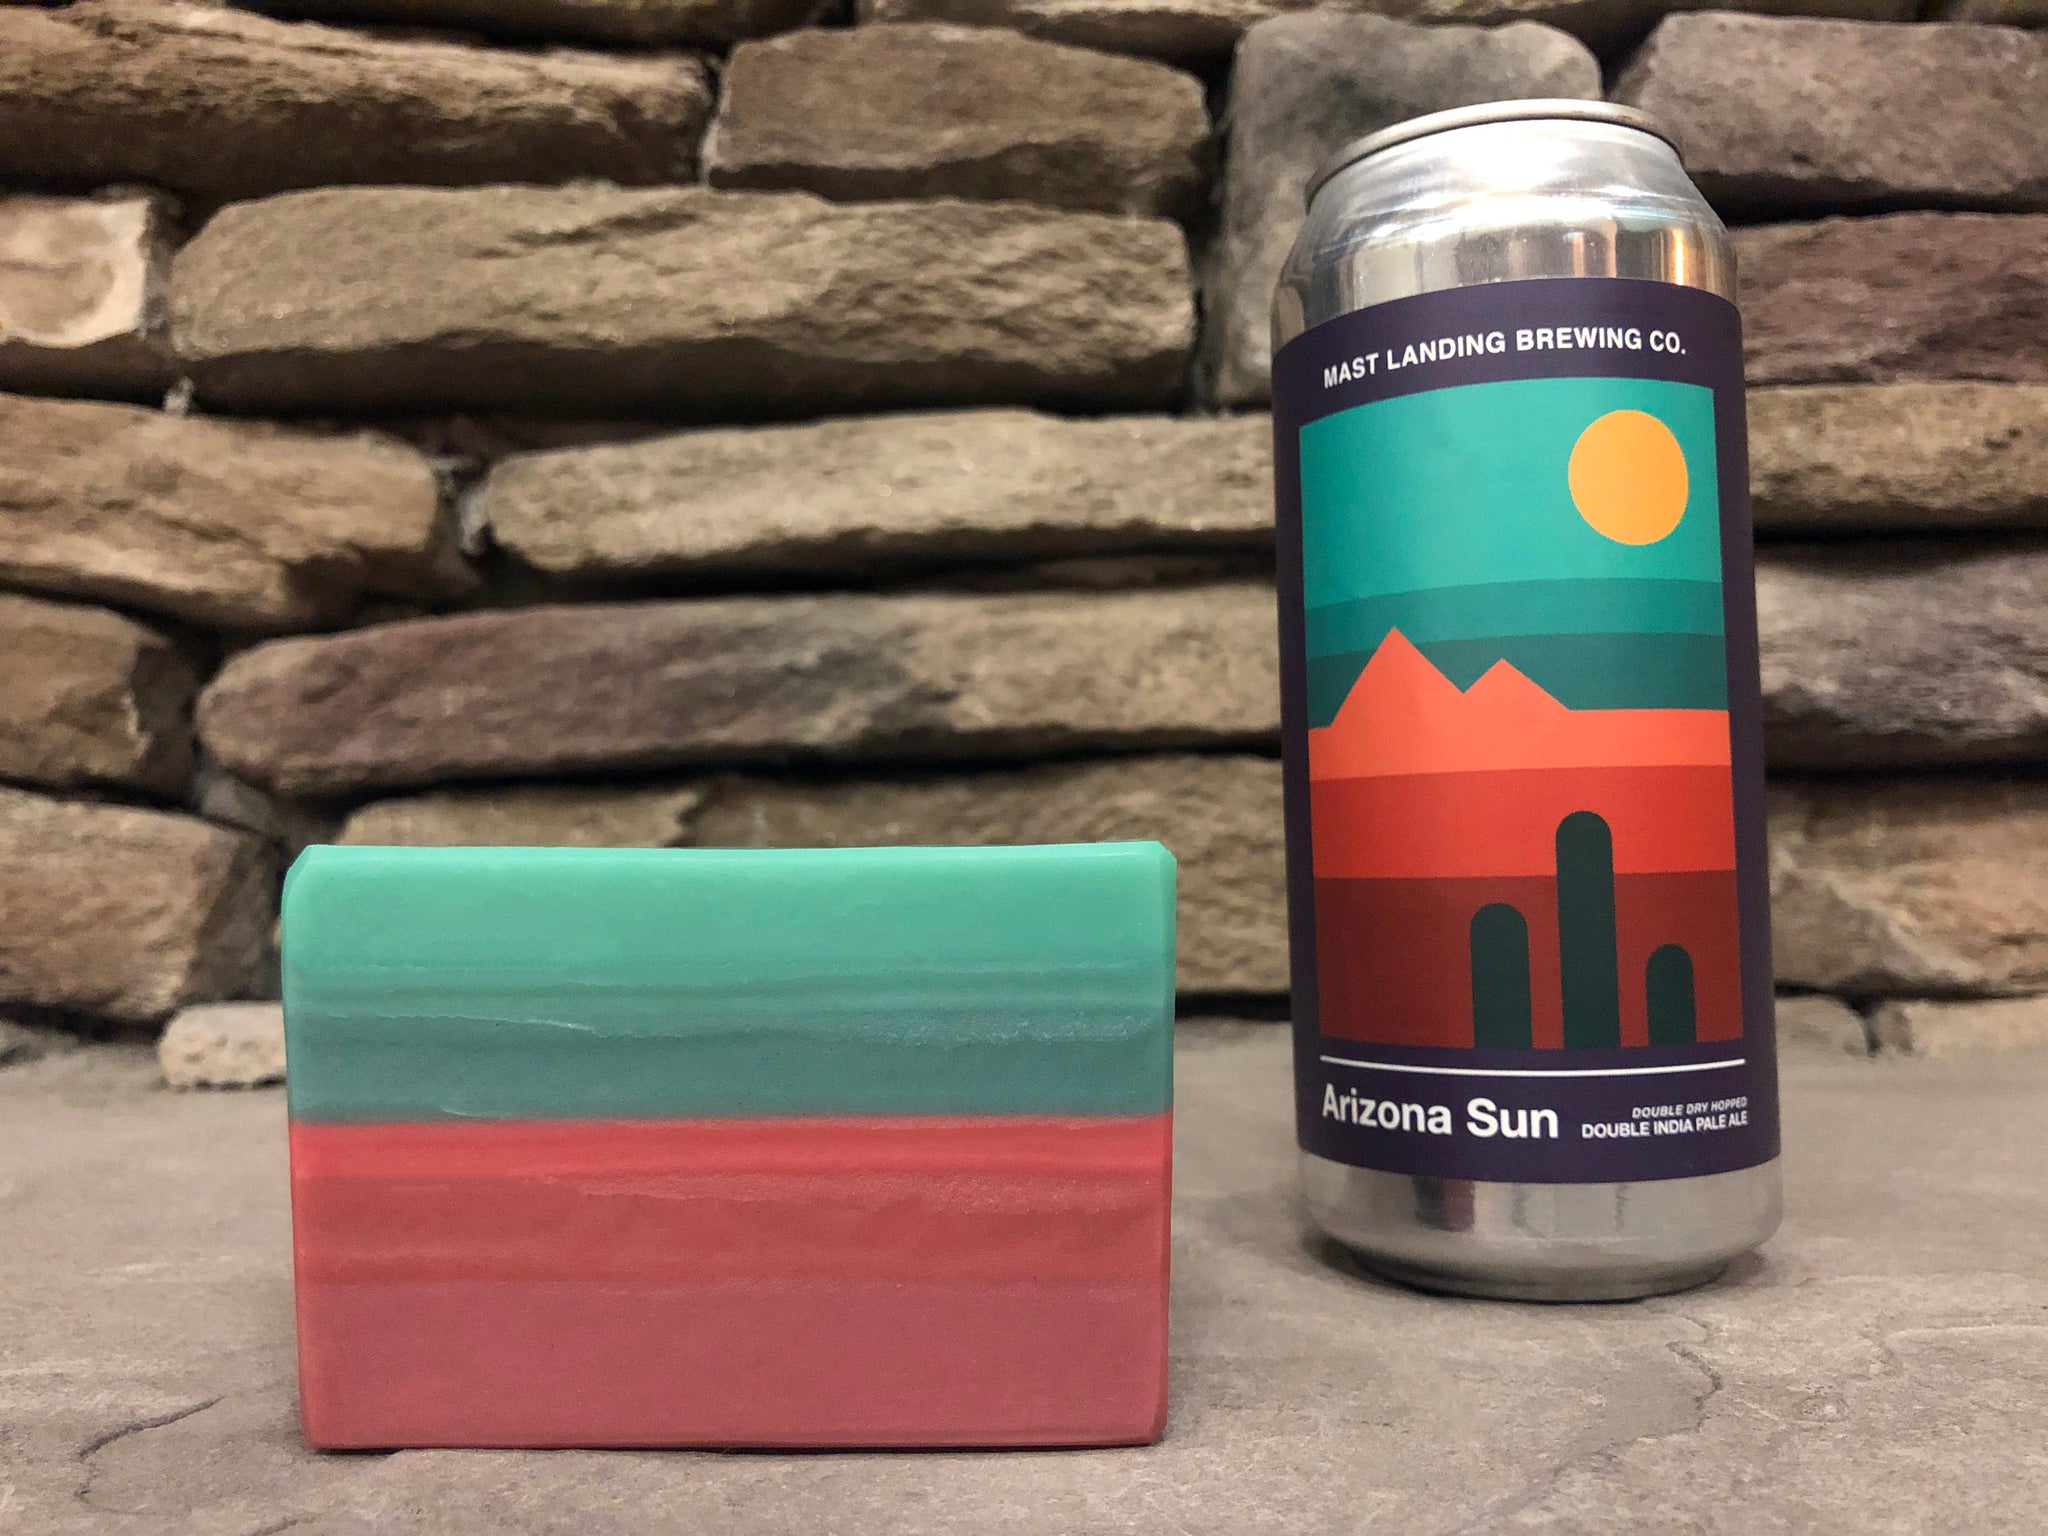 craft beer soap by spunkndisorderly handmade with arizona sun double dry hopped double India pale ale from mast landing brewing co Maine craft brewery striped orange and teal beer soap for him with activated charcoal 